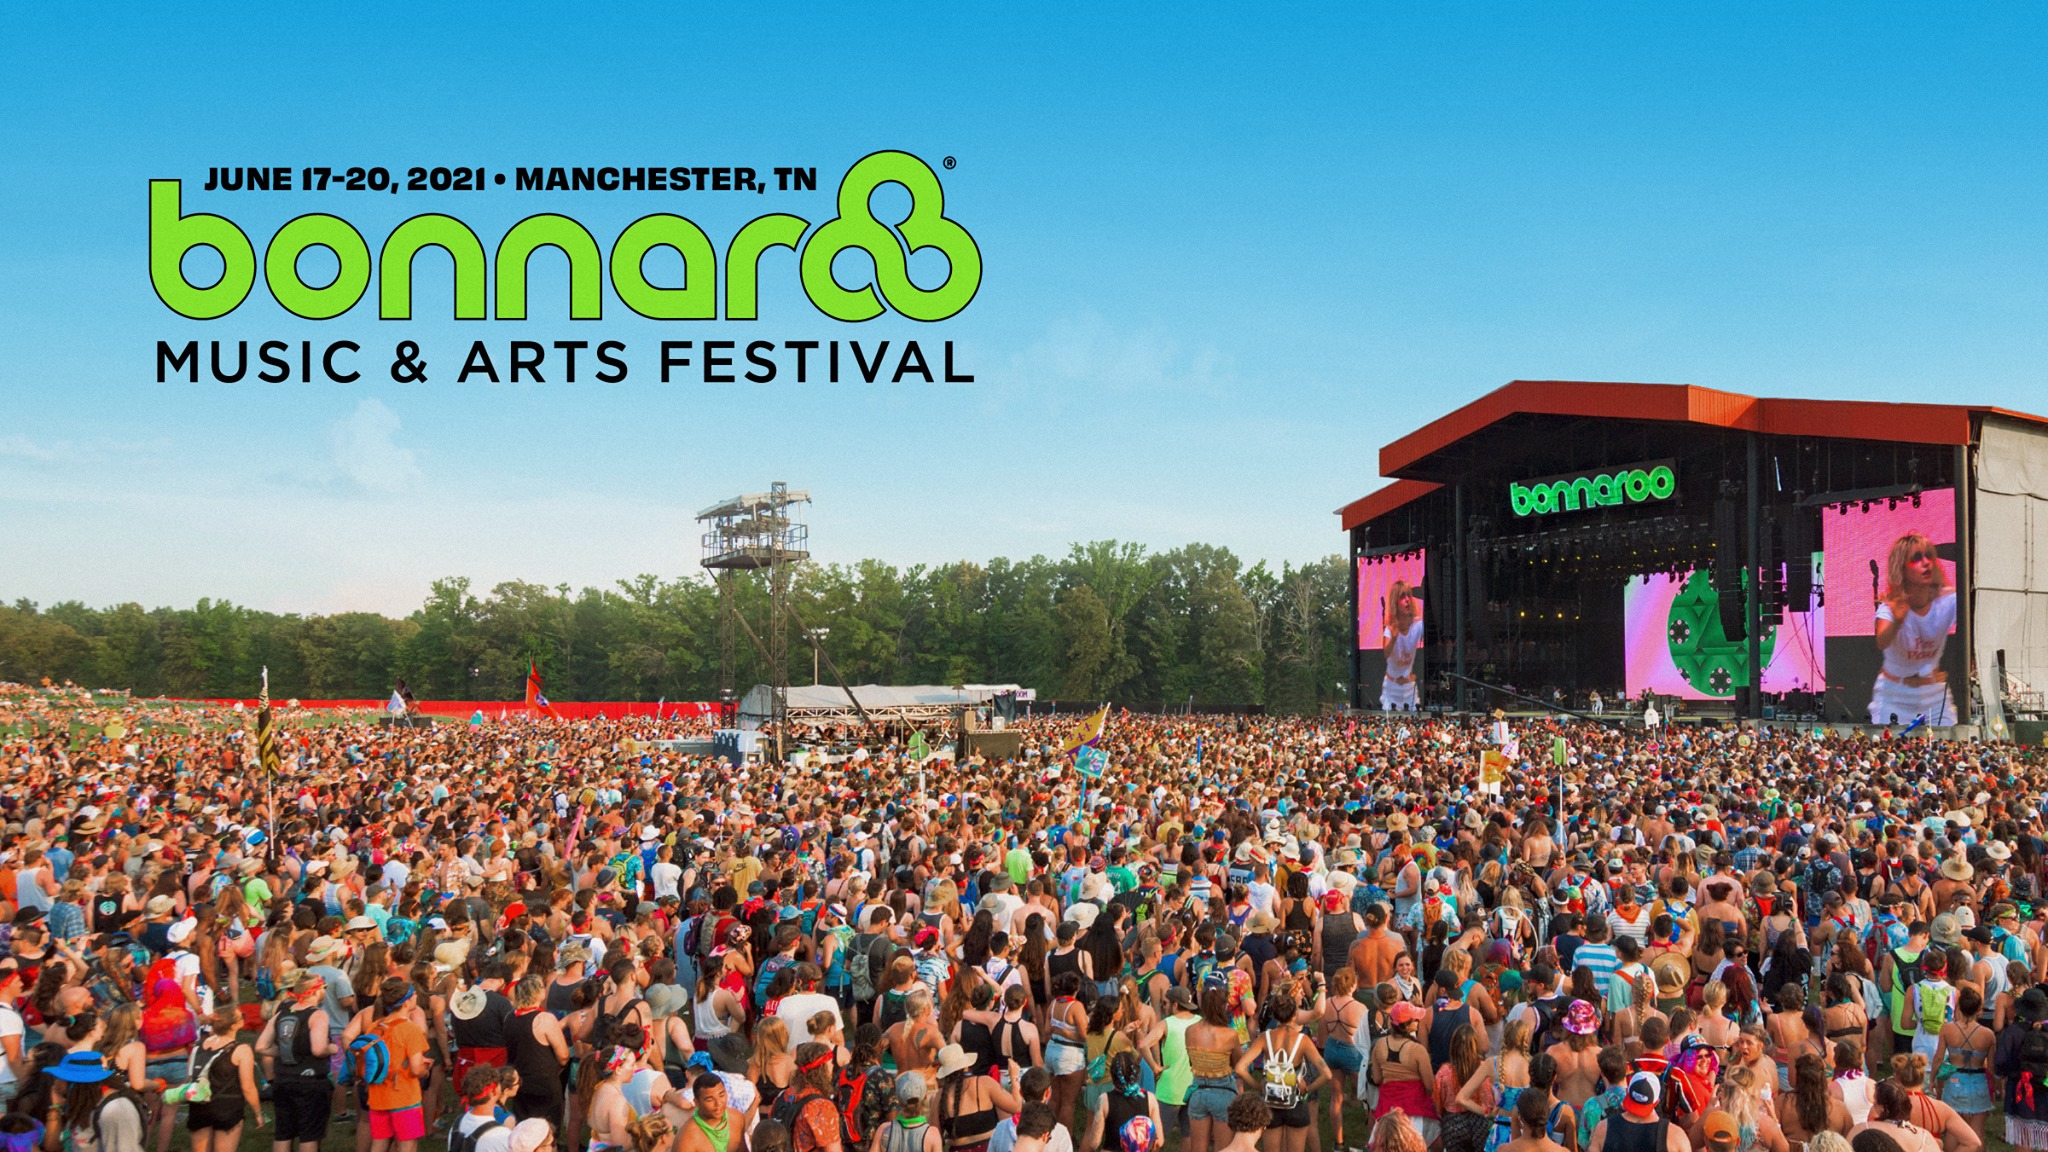 “Staying True to the Roo”: A Q&A with Bonnaroo’s Festival Director